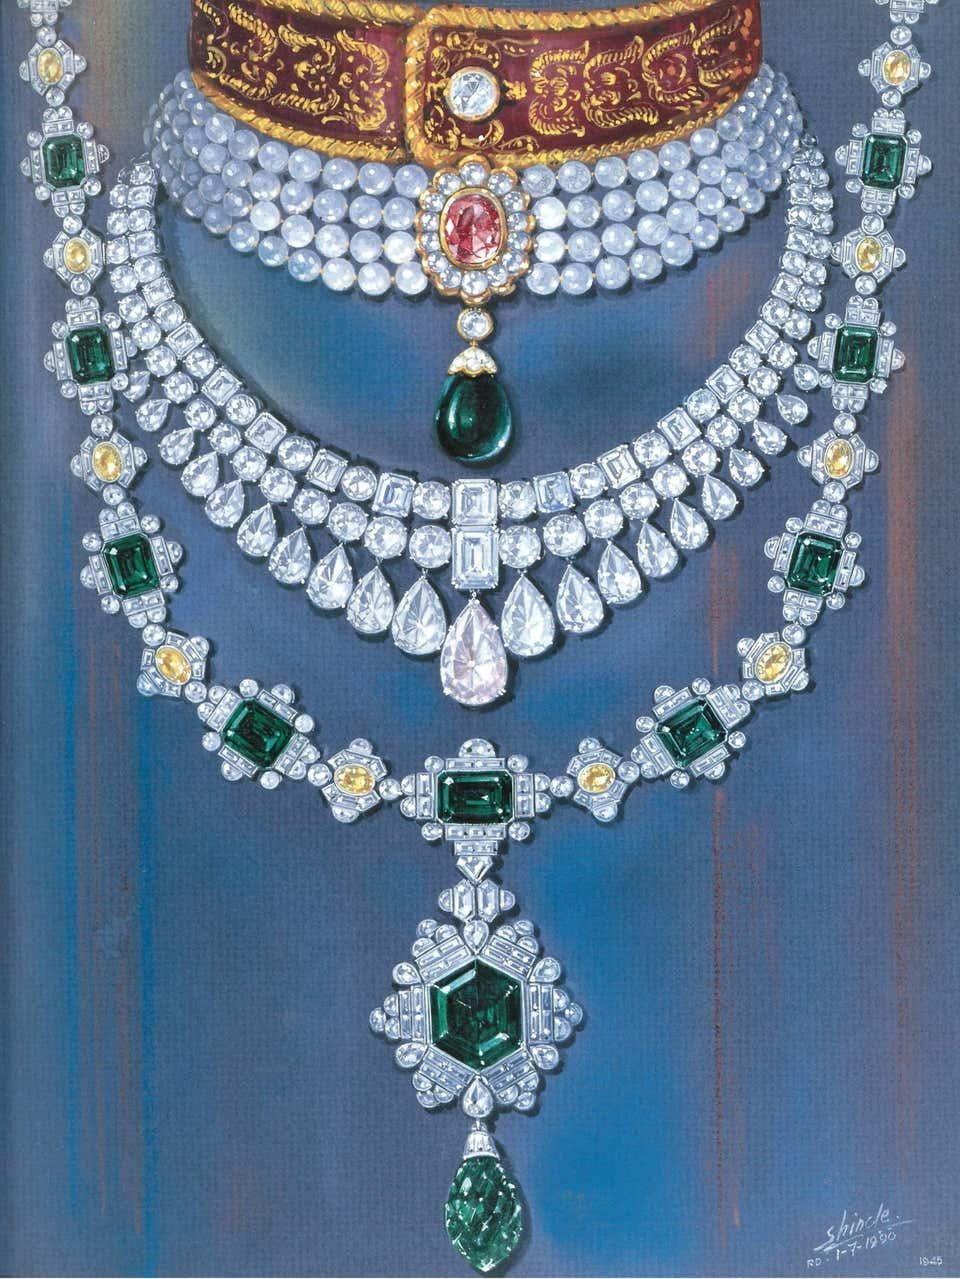 Maharaja's Jewels Table Book by Katherine Prior, Assouline In Good Condition For Sale In North Hollywood, CA